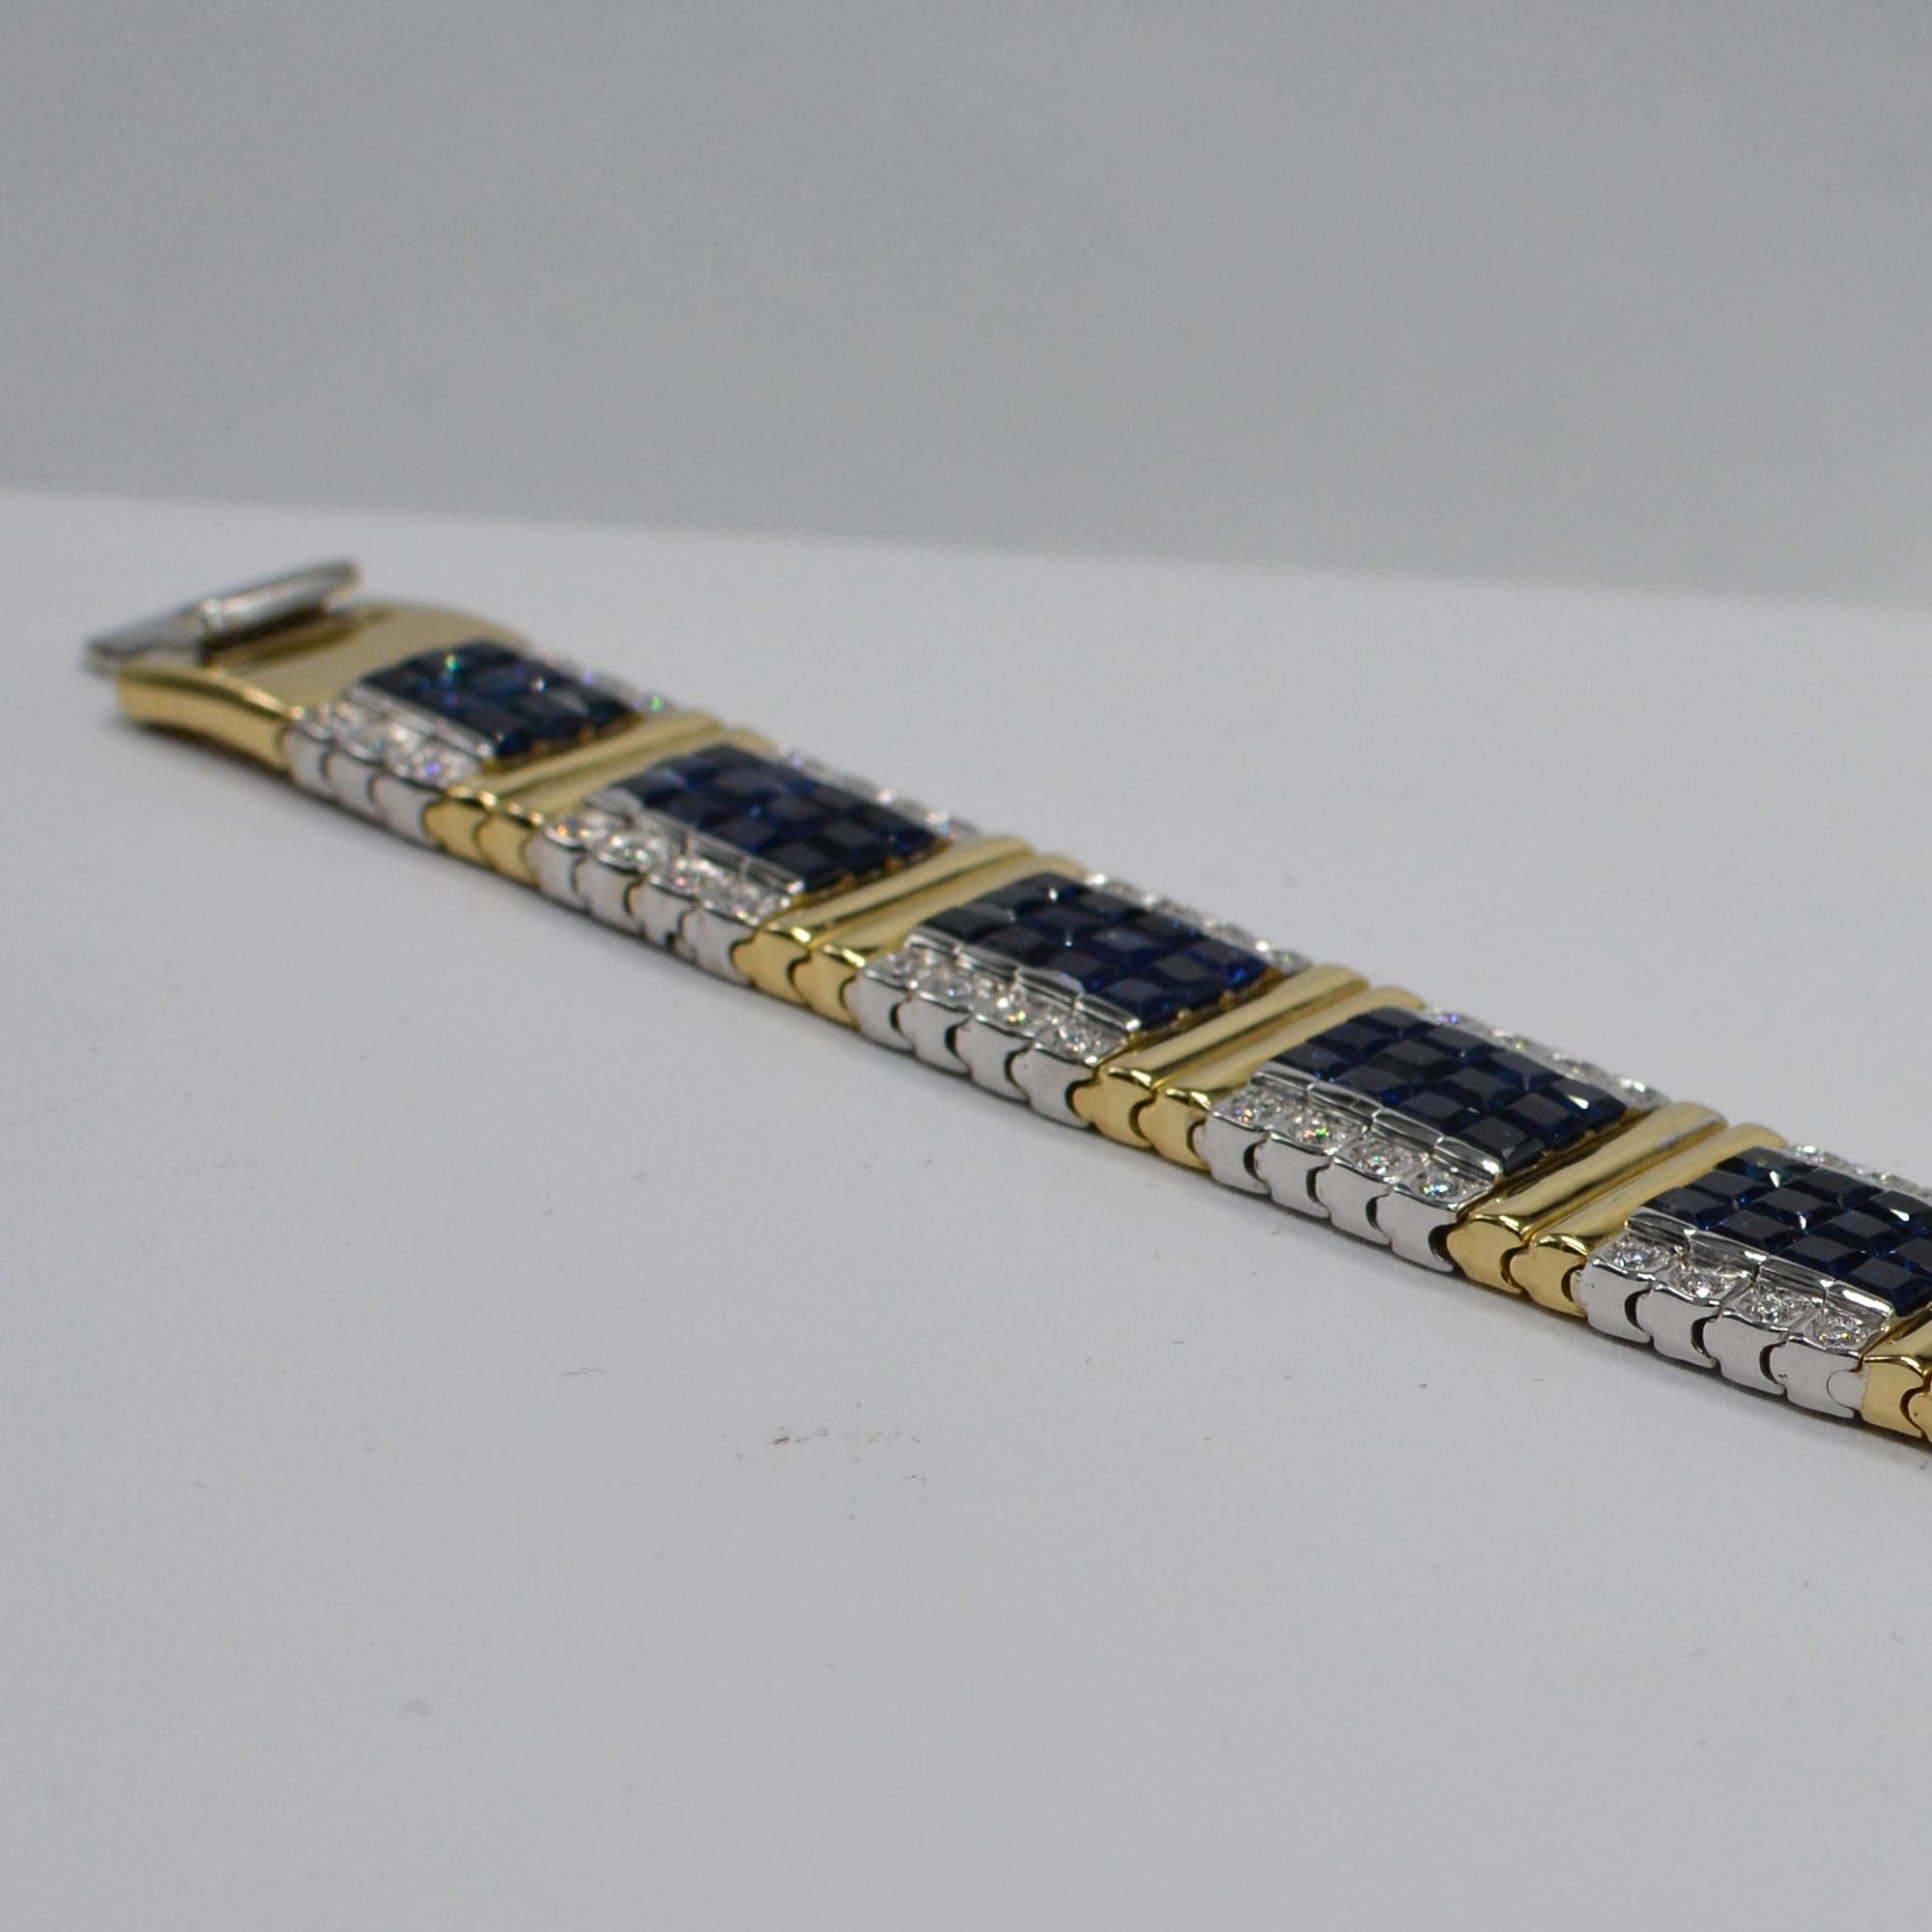 Unique Two Color Gold 
Blue sapphire Invisible Bracelet AAA Quality Sapphires Total of 18.00 carat.
with Diamonds on the sides total of 1.90 carat  GH-VS.
14K White & Yellow Gold 44.0 Grams.
Lenght 6.75' Inch.
Bracelet width is approx 13 mm
